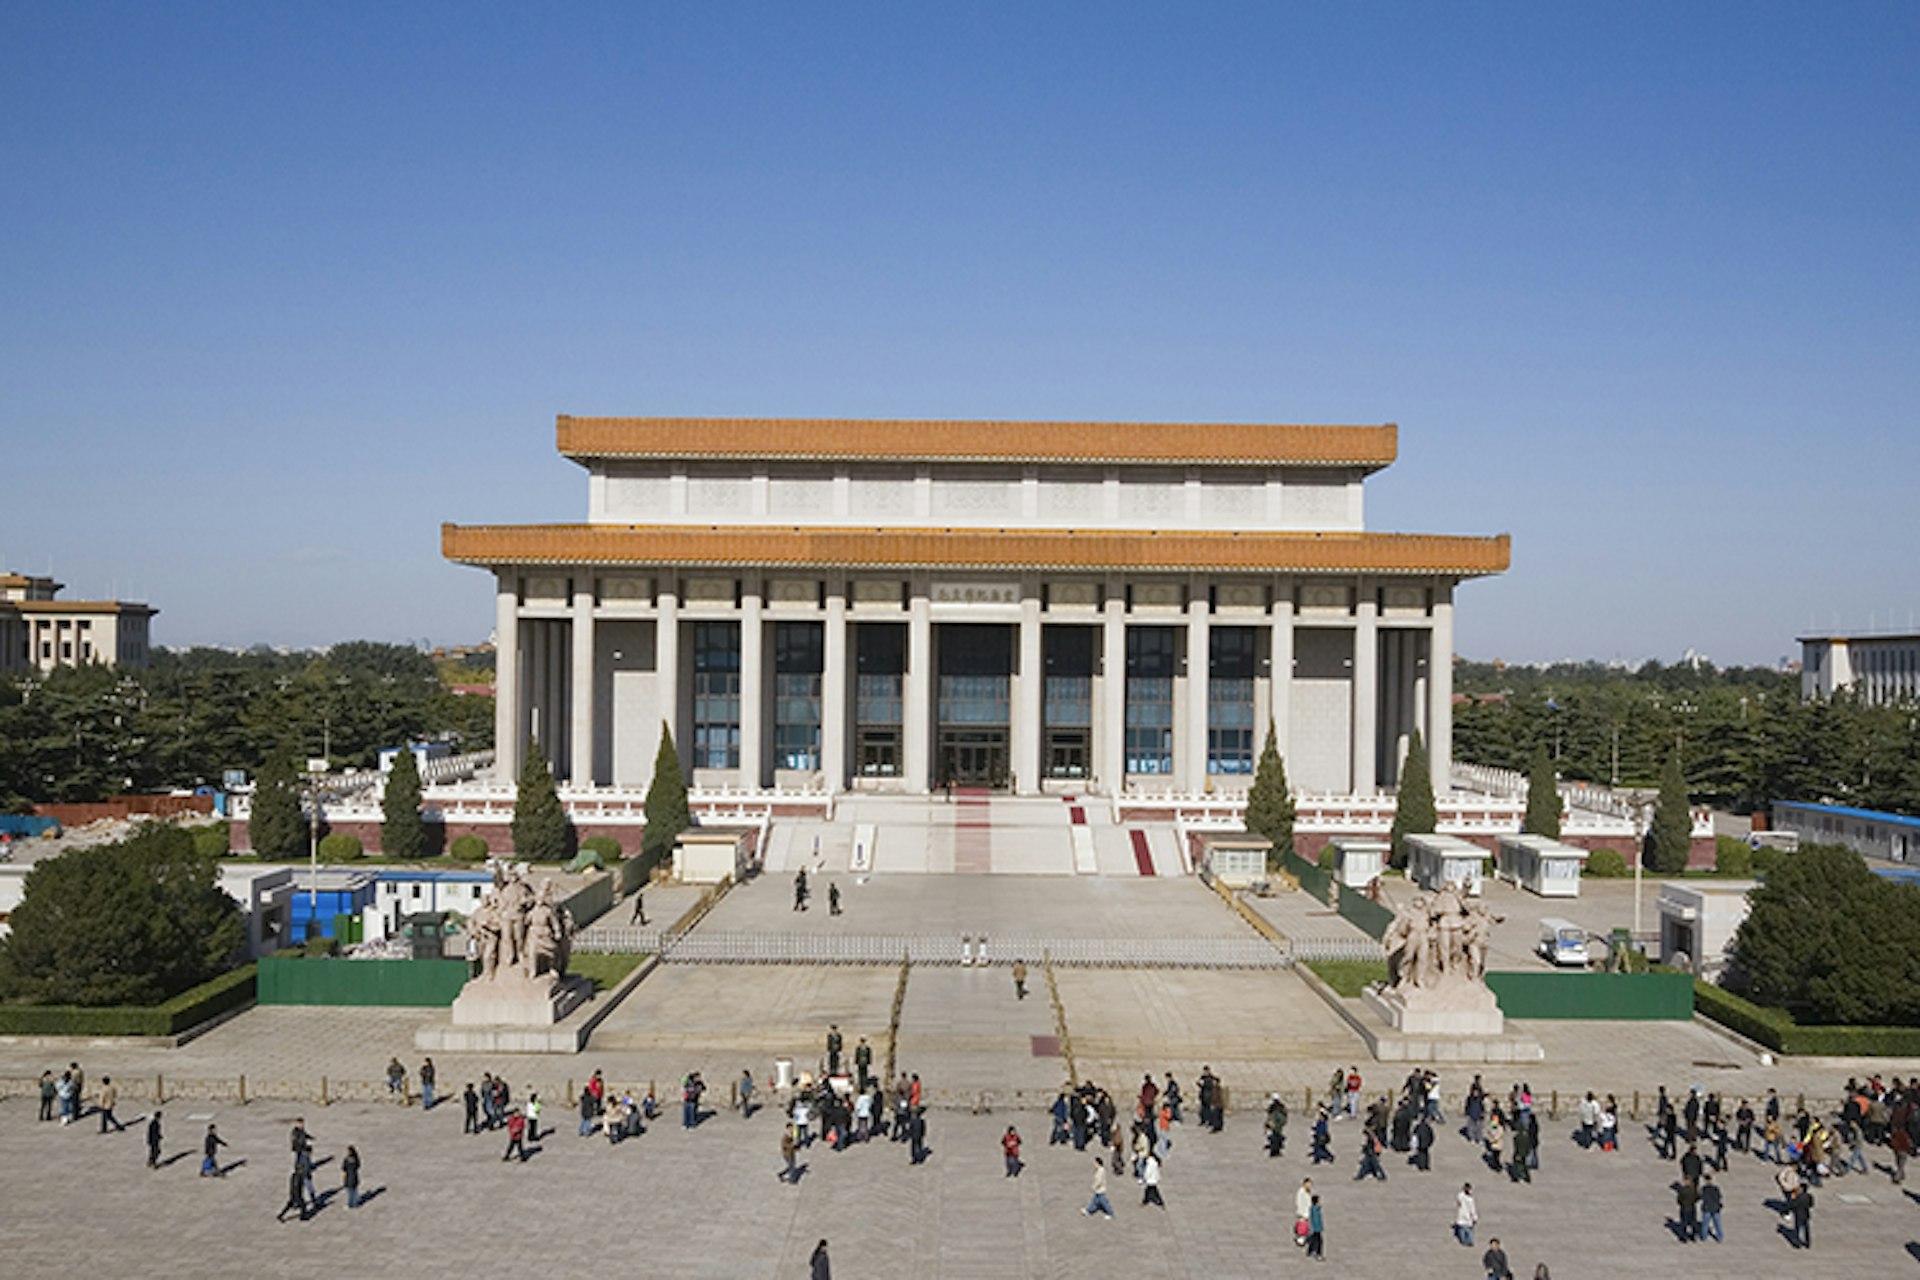 Crowds outside Mao Zedong's mausoleum in Beijing, China. Image by  MIXA / Getty Images